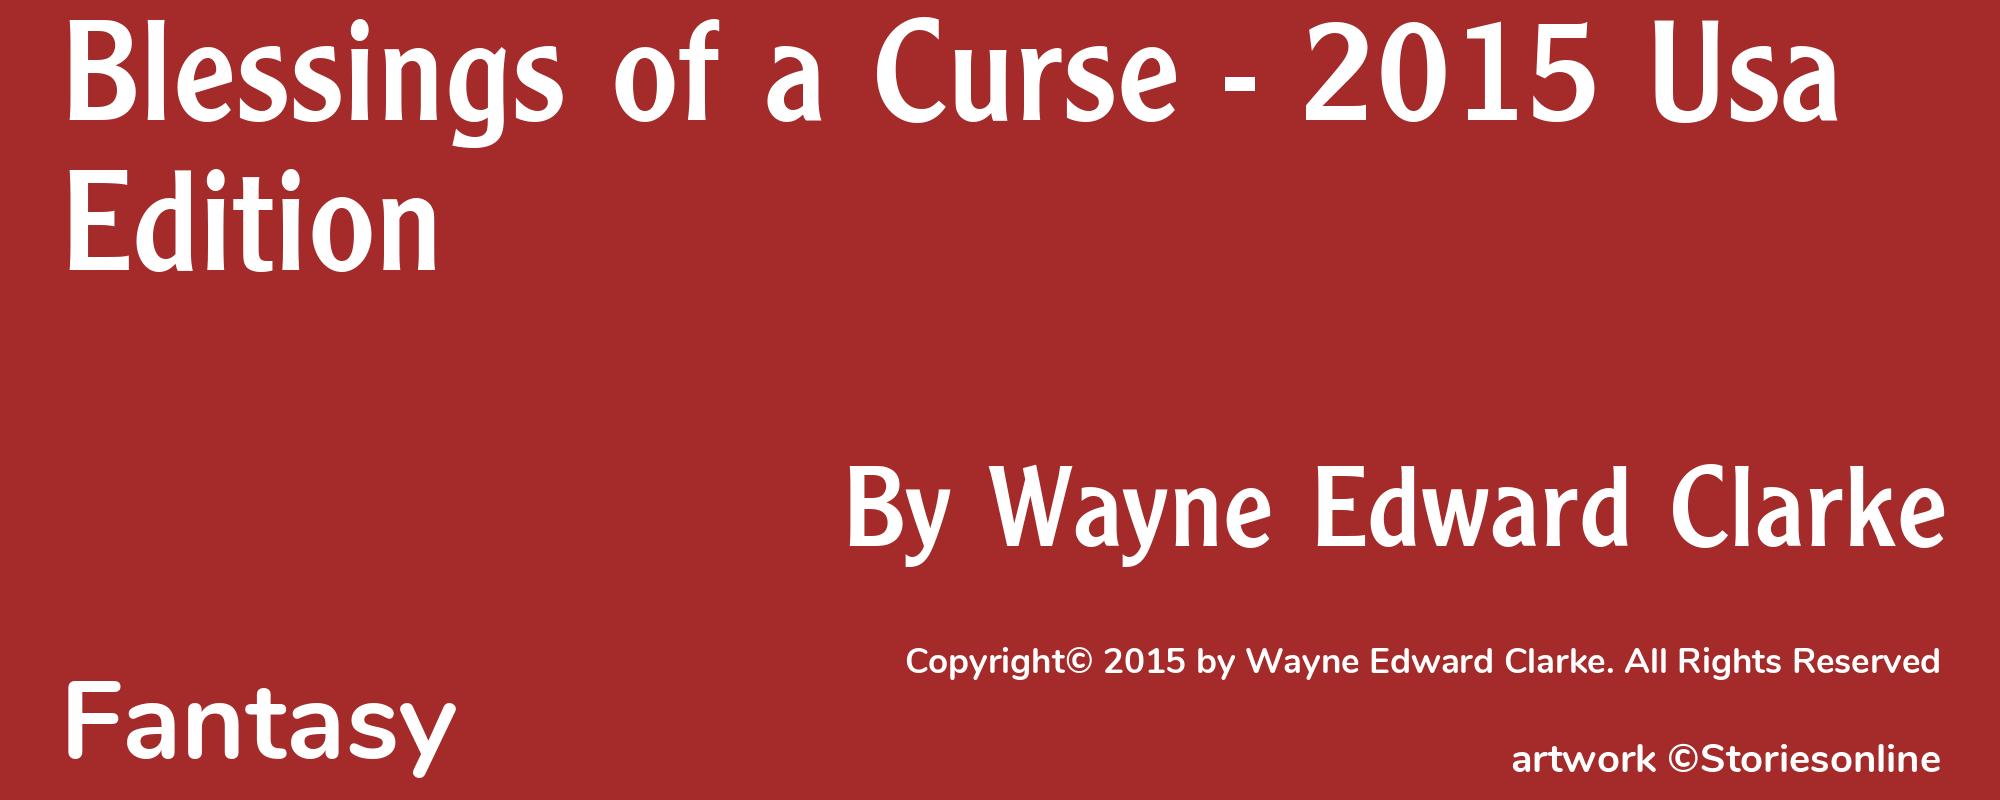 Blessings of a Curse - 2015 Usa Edition - Cover